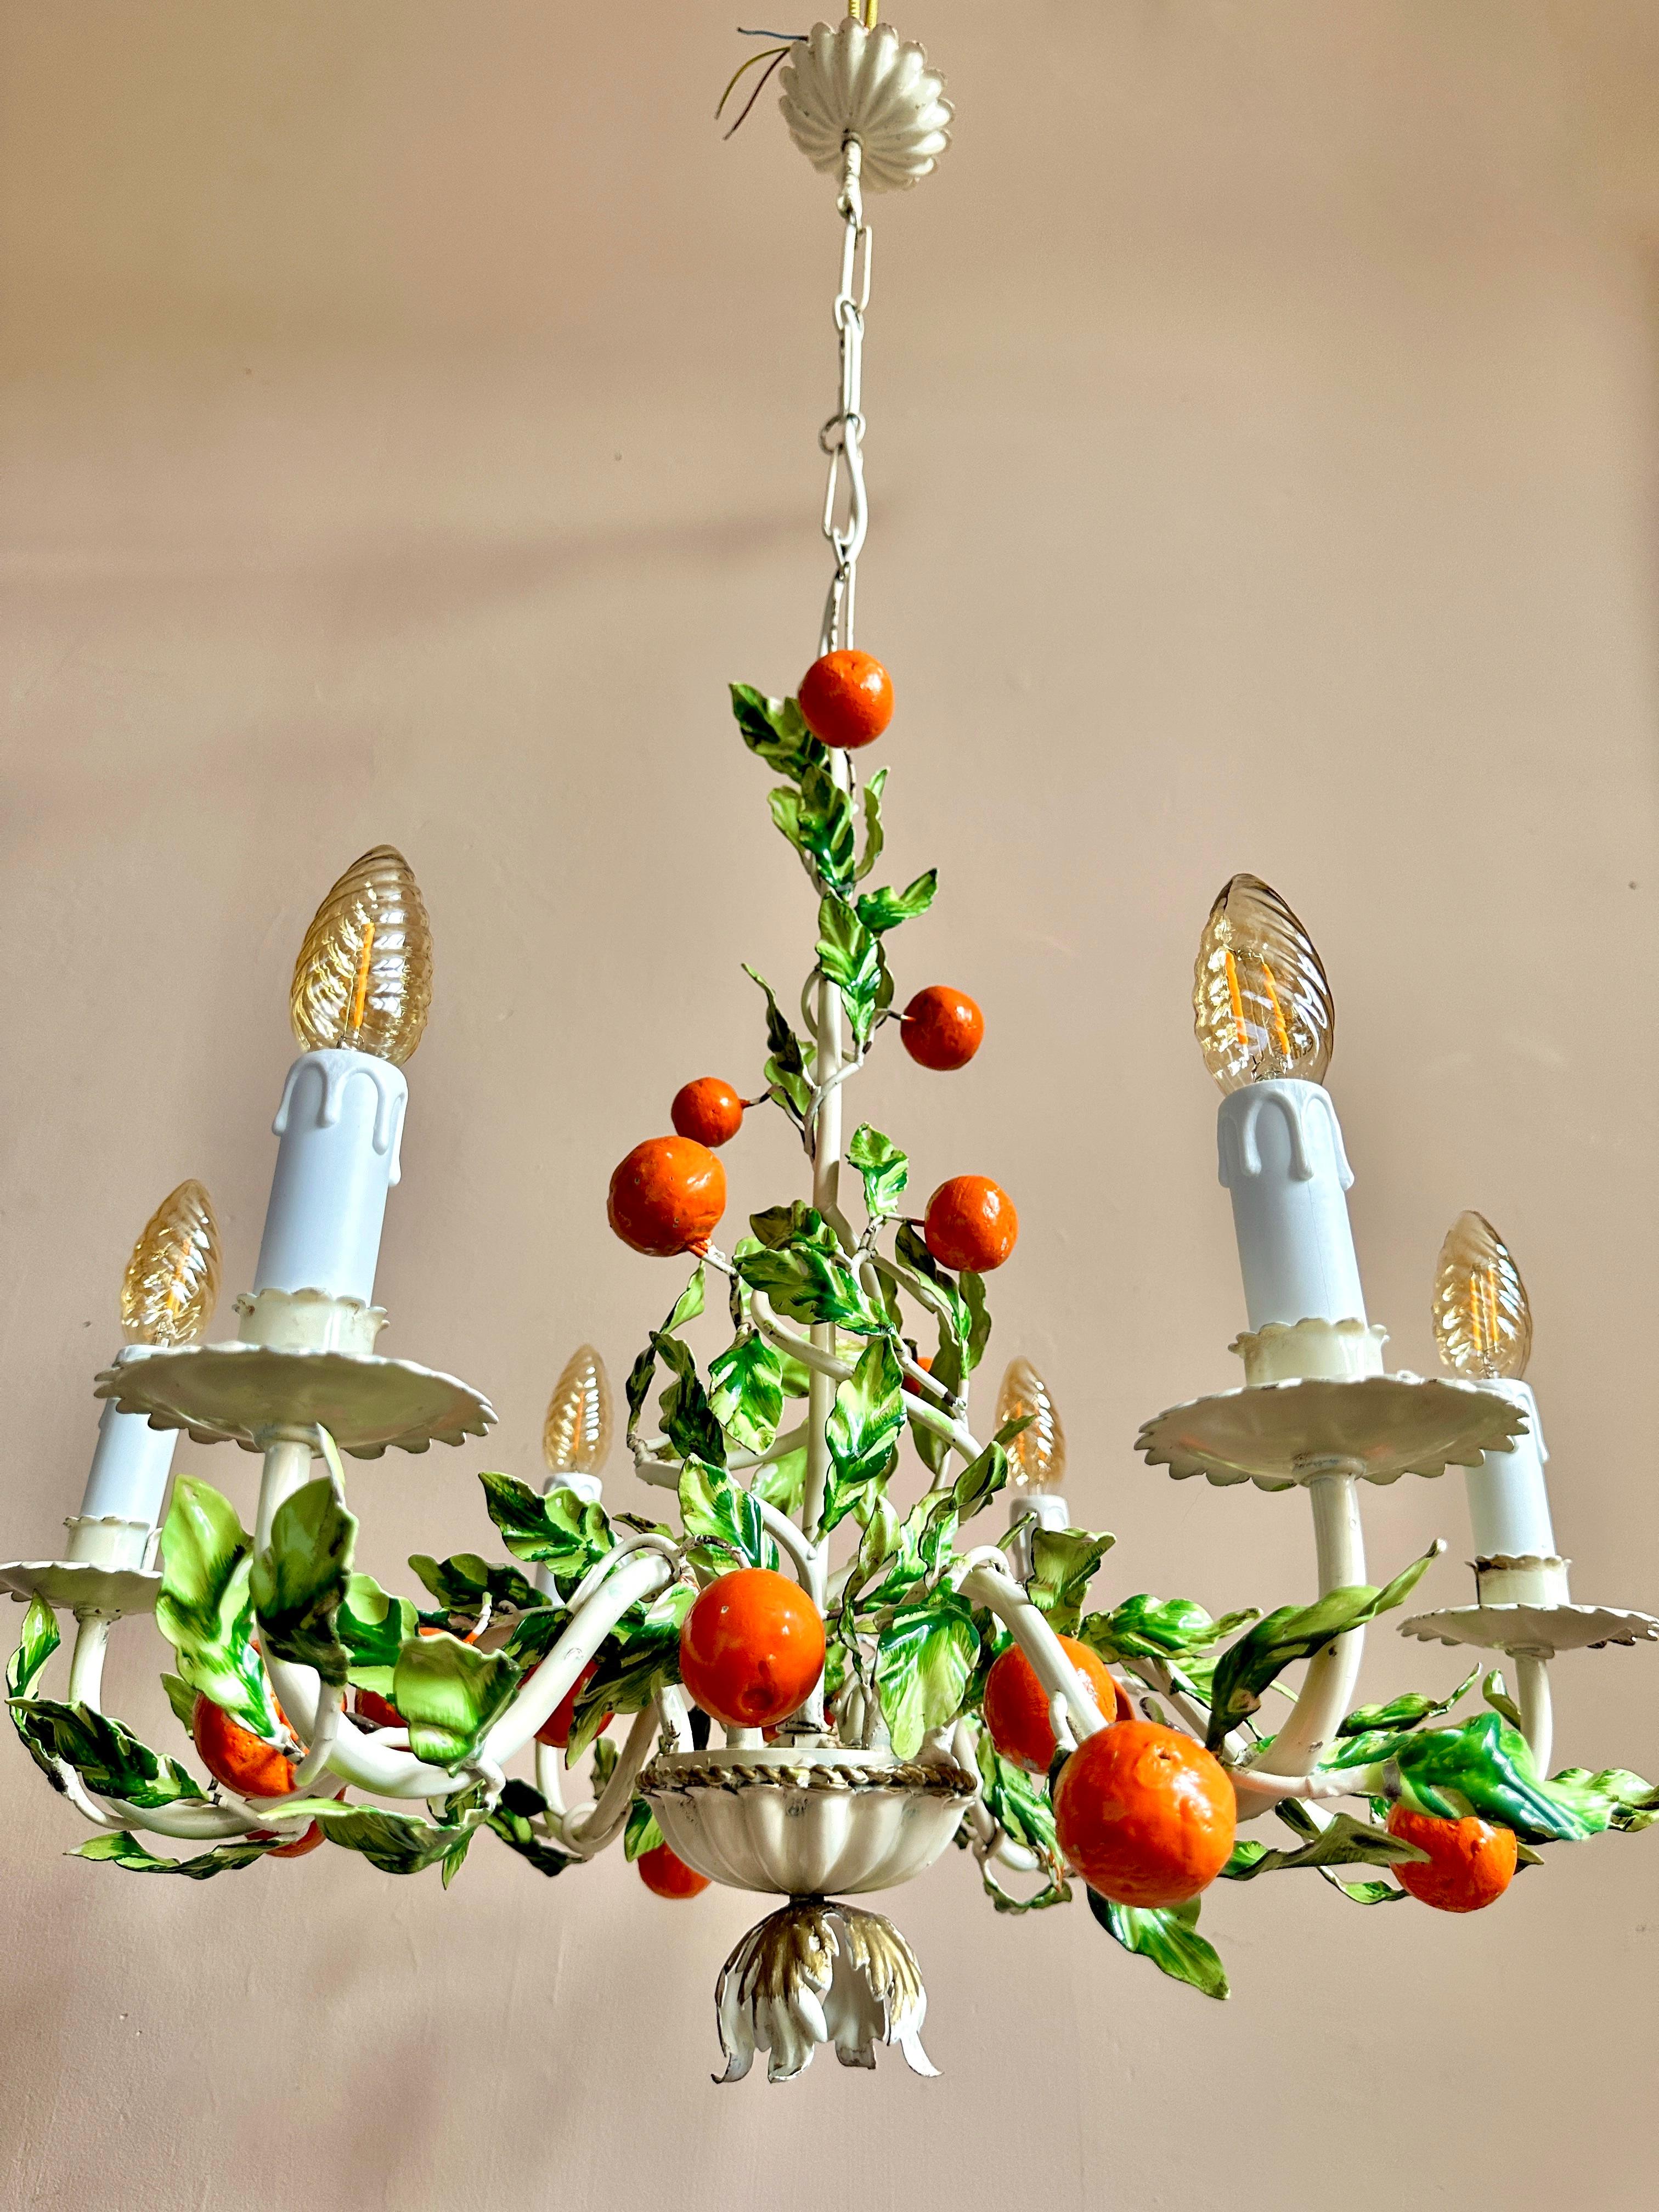 1940s Italian orange toleware chandelier.

Superb and rare Florentine hand-painted, six-arm ceiling light. In excellent condition with very light and attractive wear. The chandelier has been rewired, fitted with new bulb holders & sleeves and PAT